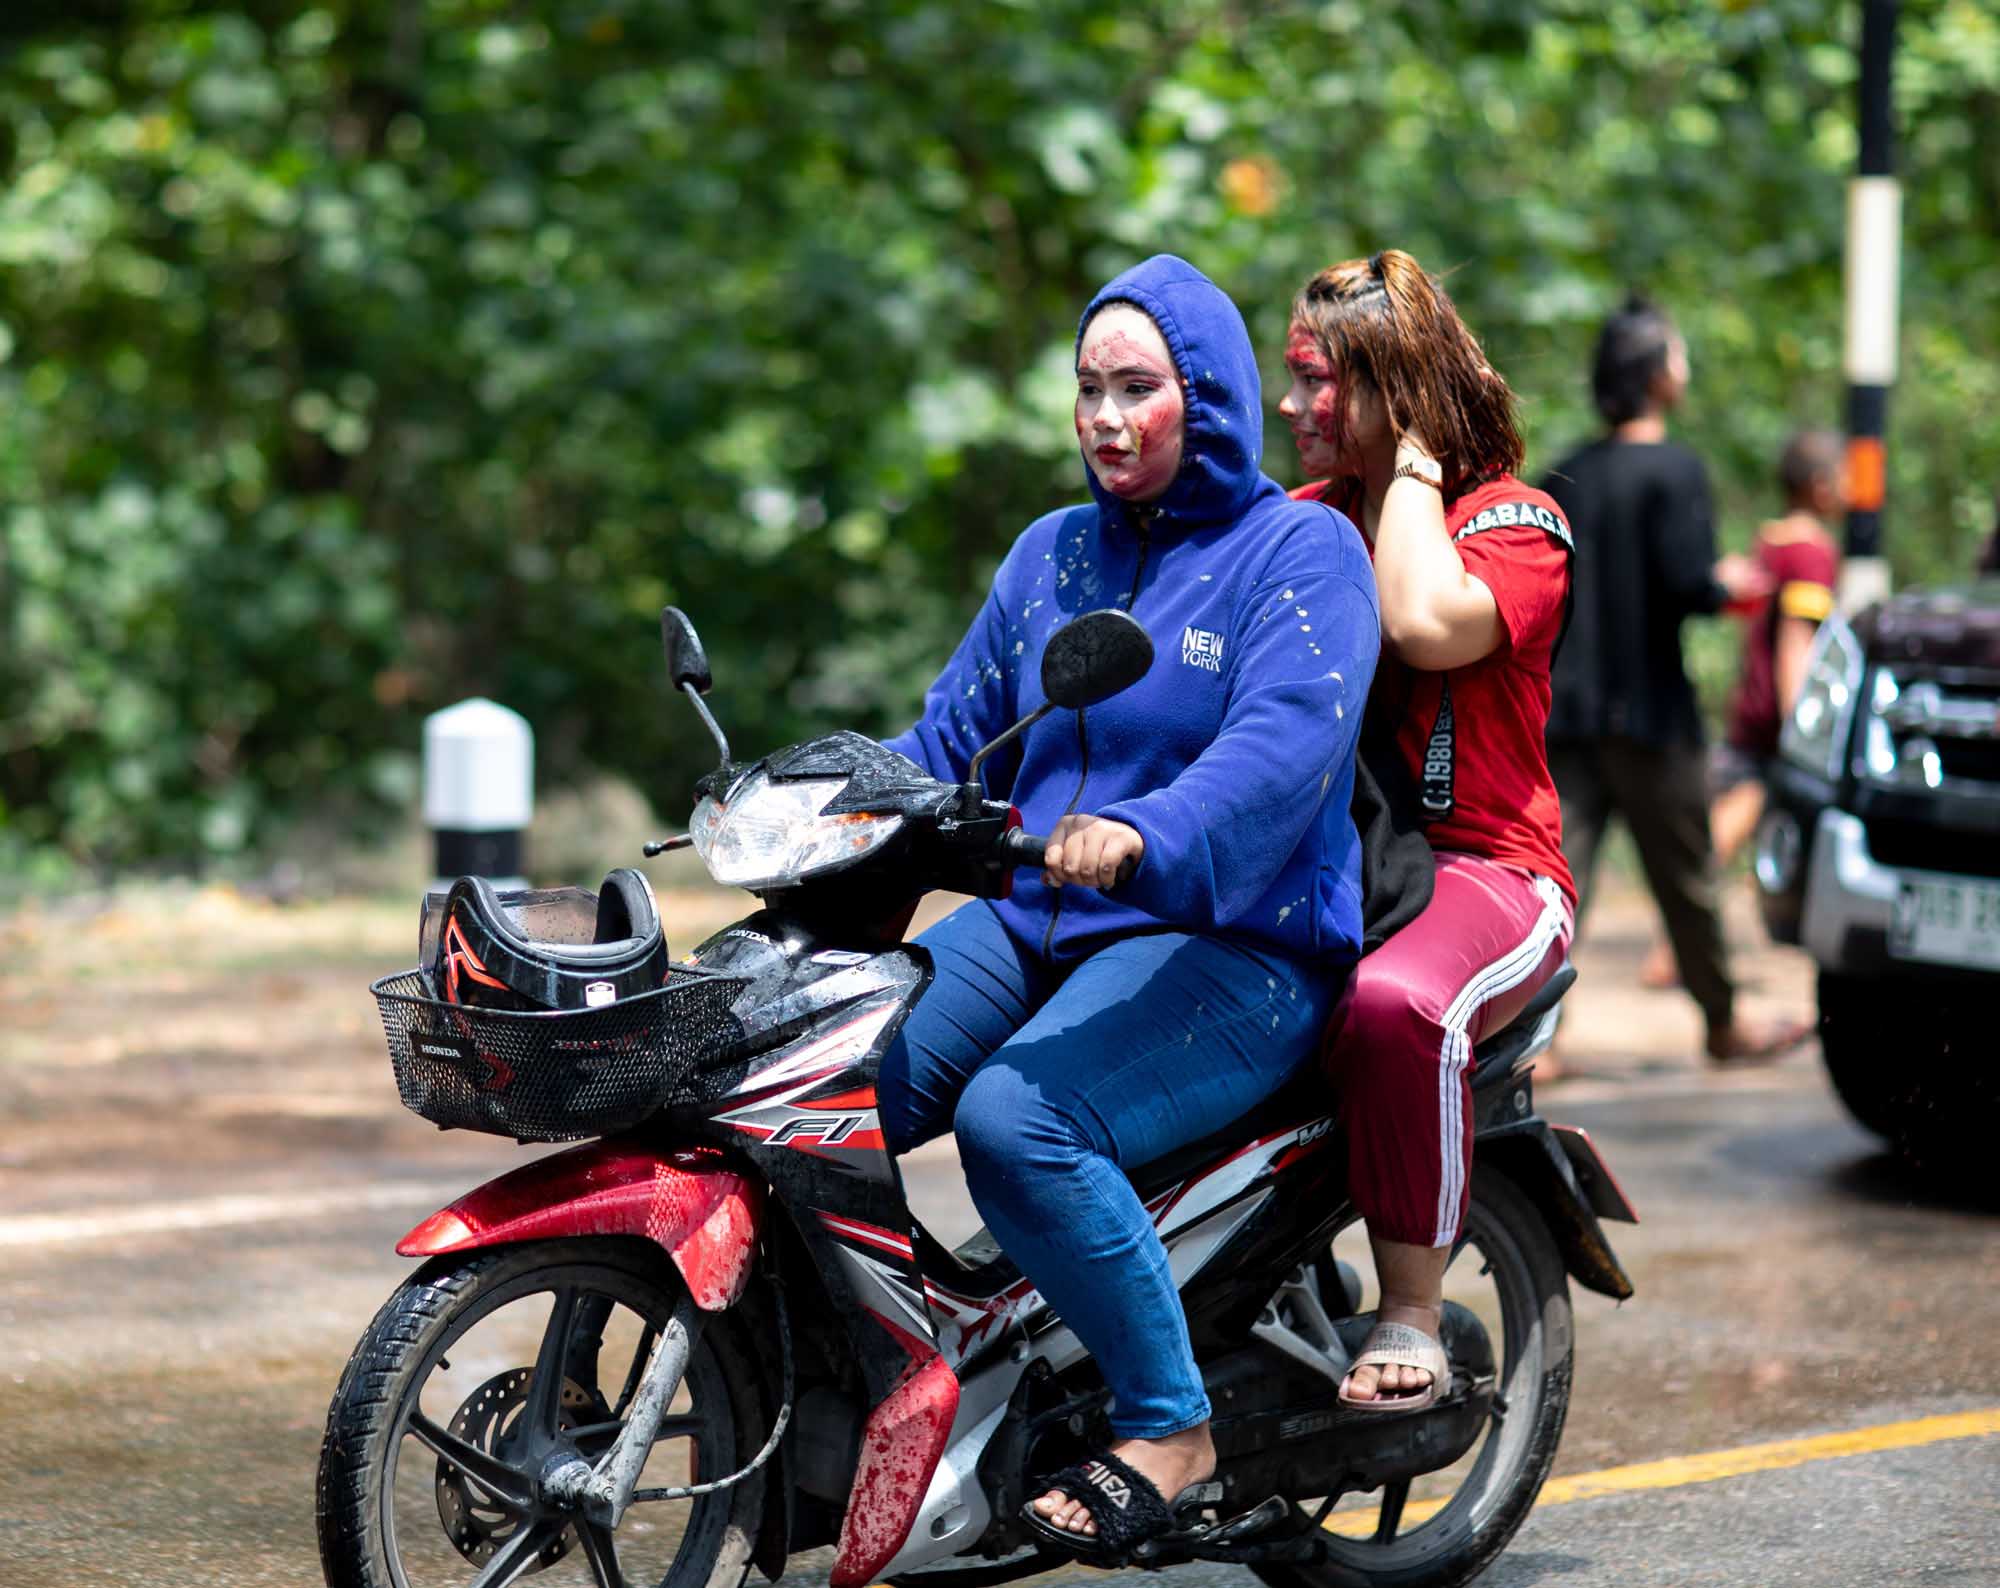 Two women on a motorbike at Songkran water festival in Phuket, Thailand